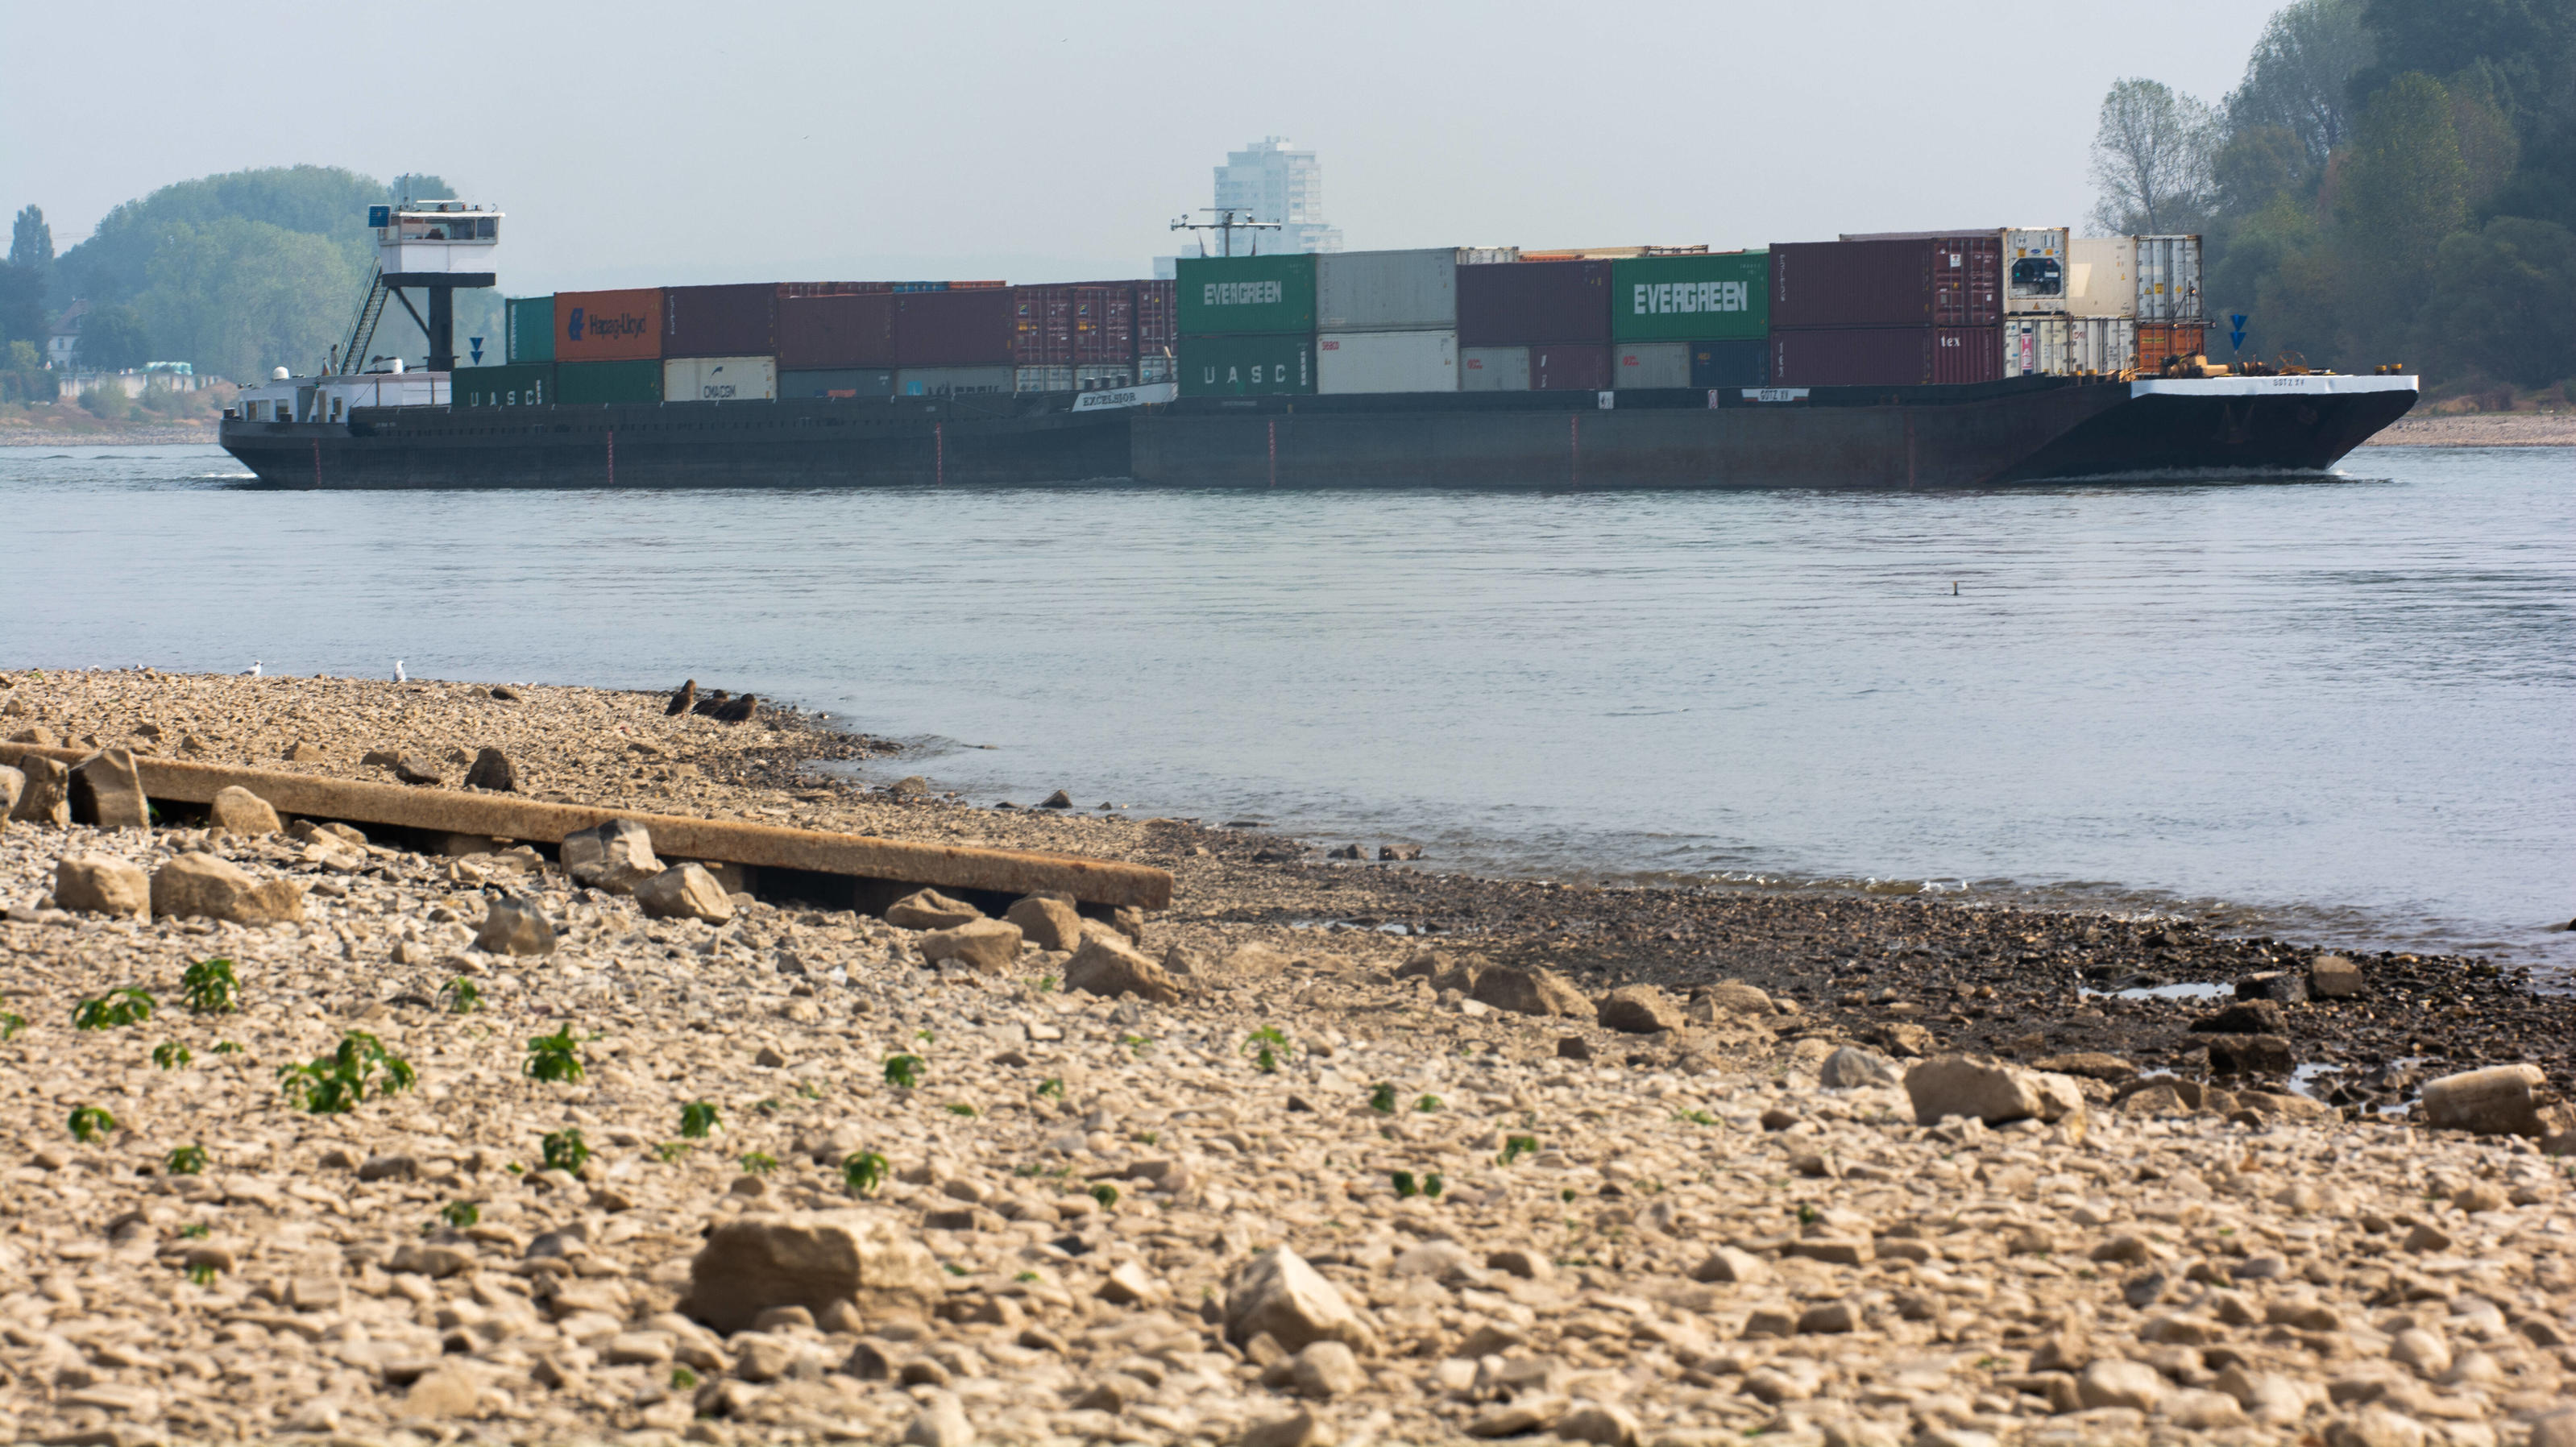  Drought Weather Continues In Cologne a cargo ship is seen on the rhine river in Cologne, Germany on August 19, 2022 Cologne Germany PUBLICATIONxNOTxINxFRA Copyright: xYingxTangx originalFilename: tang-notitle220819_nph98.jpg